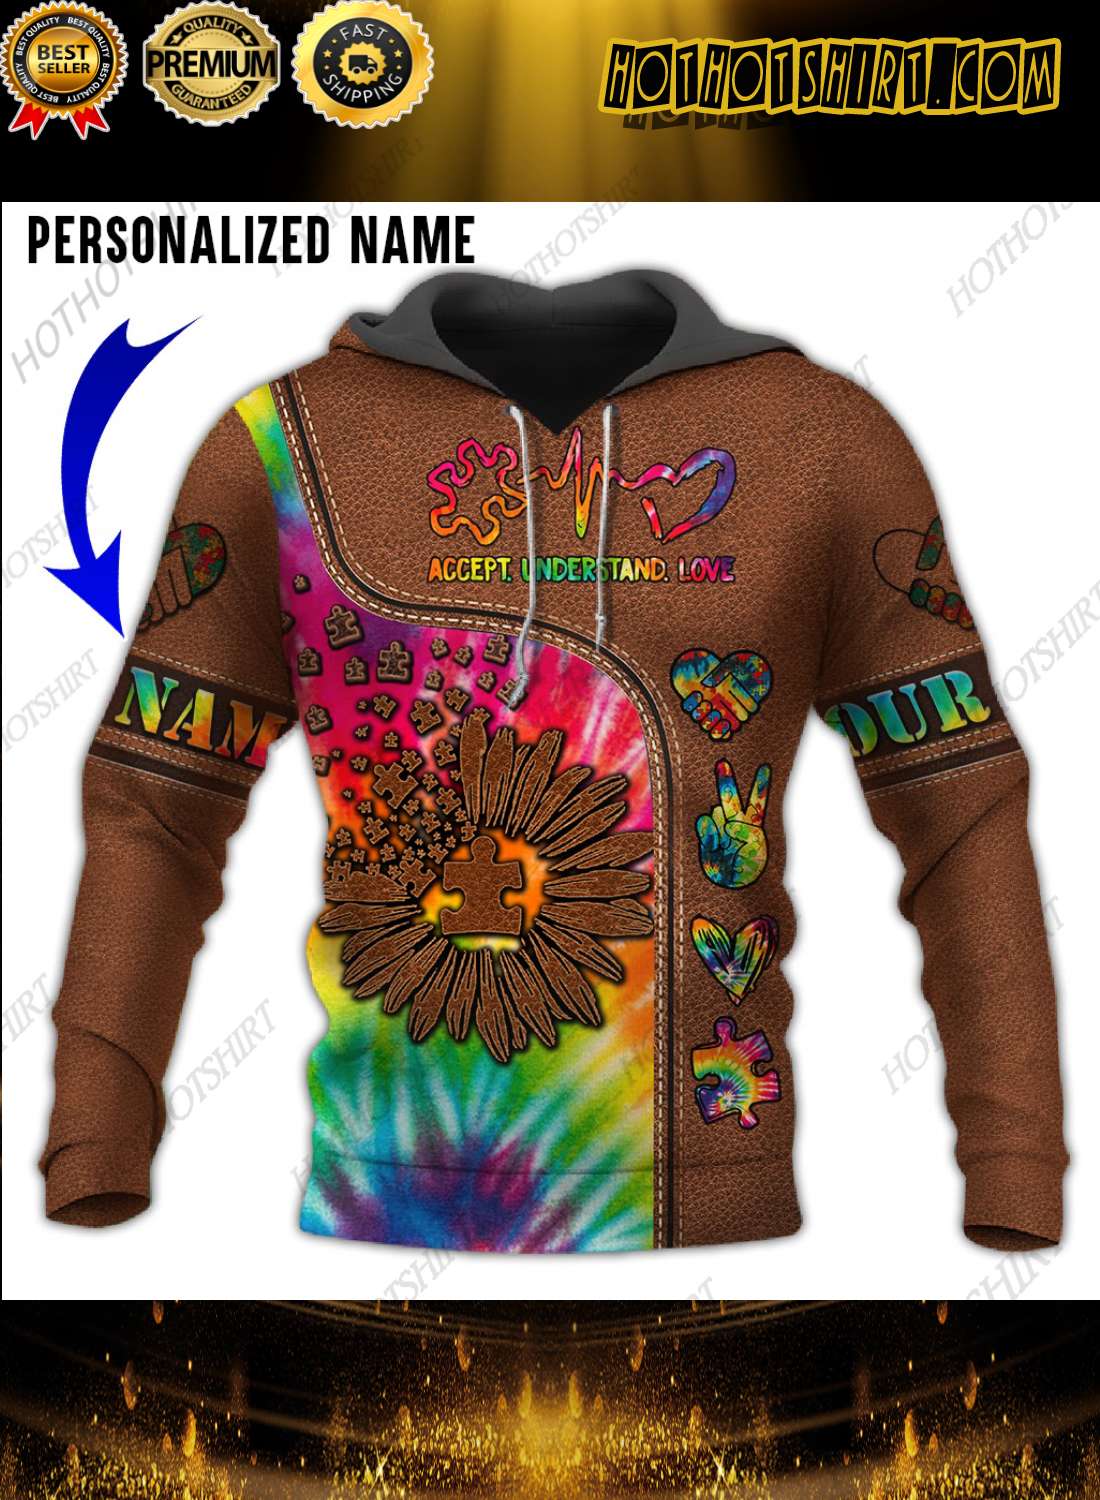 Personalized Name Autism Leather Accept Understand Love 3D Shirts